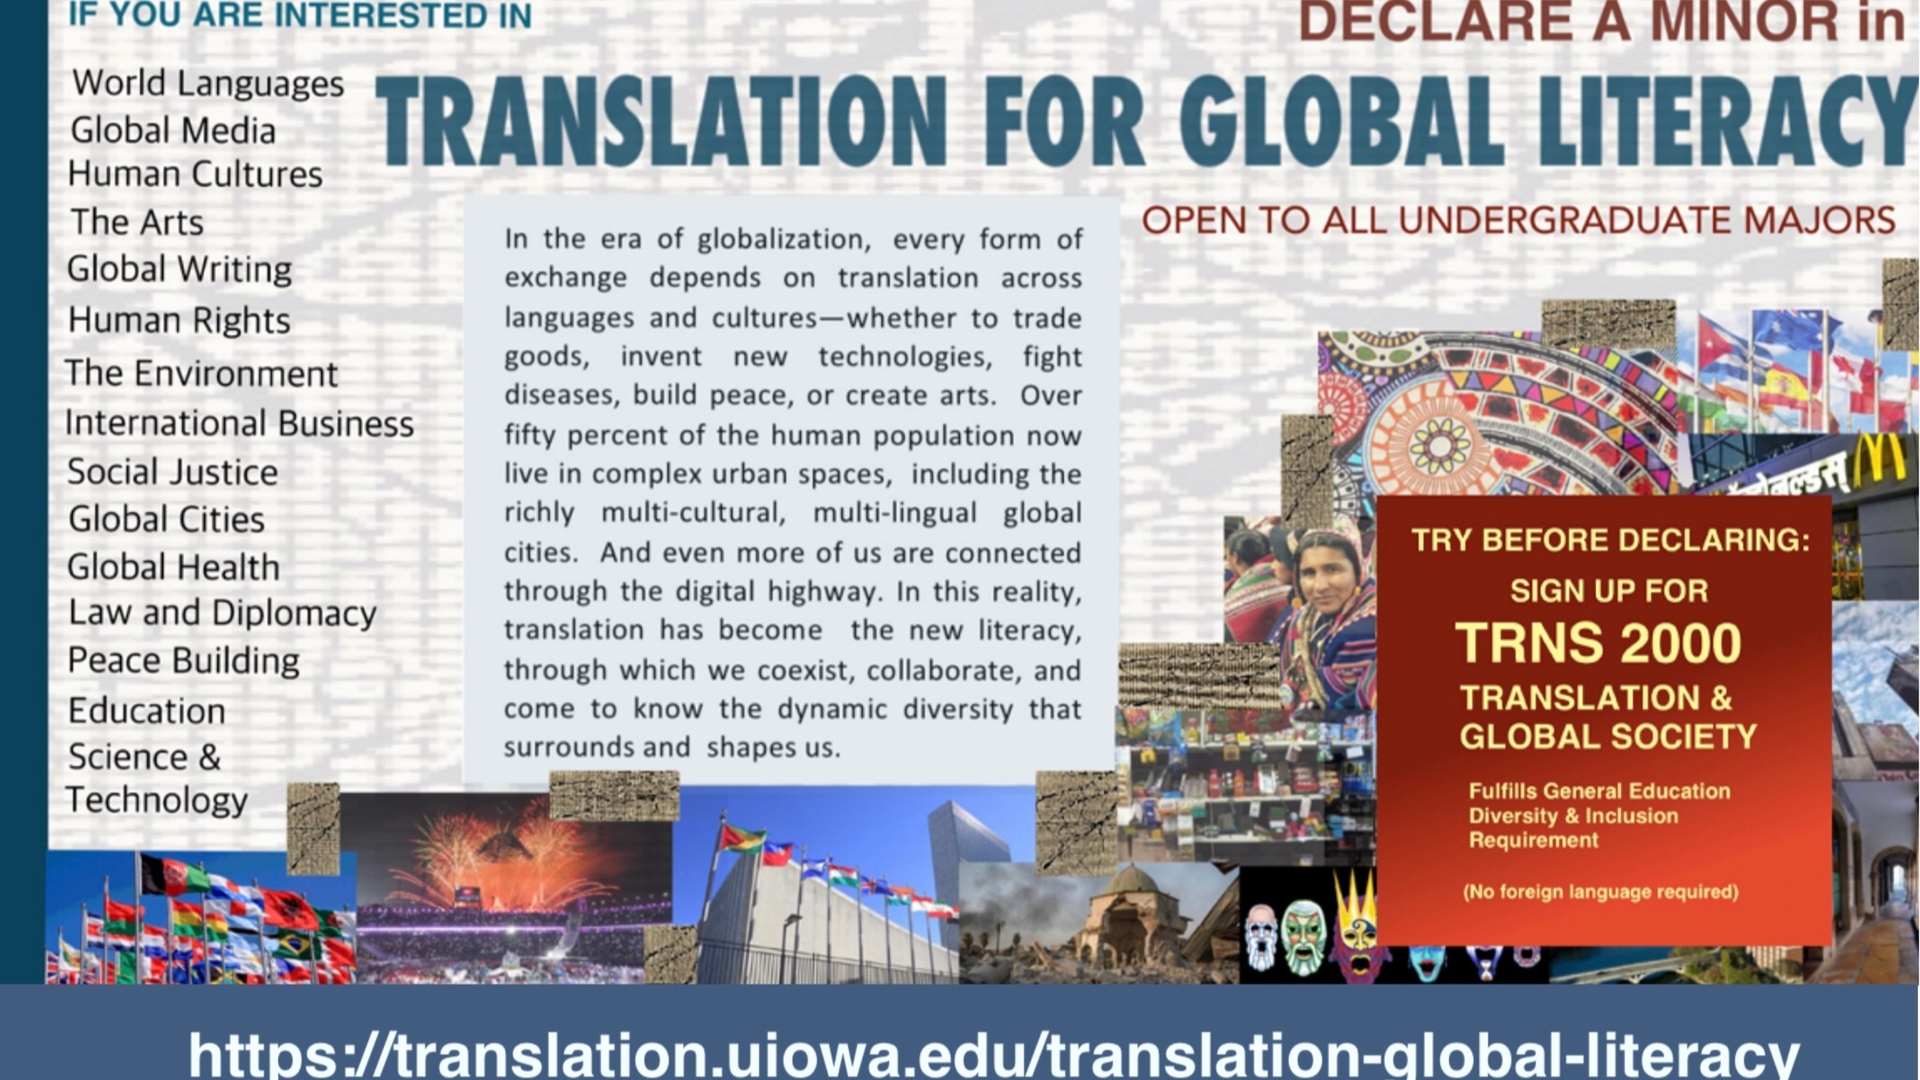 Declare a minor in translation for global literacy if are interested visit https://translation.uiowa.edu/translation-global-literacy